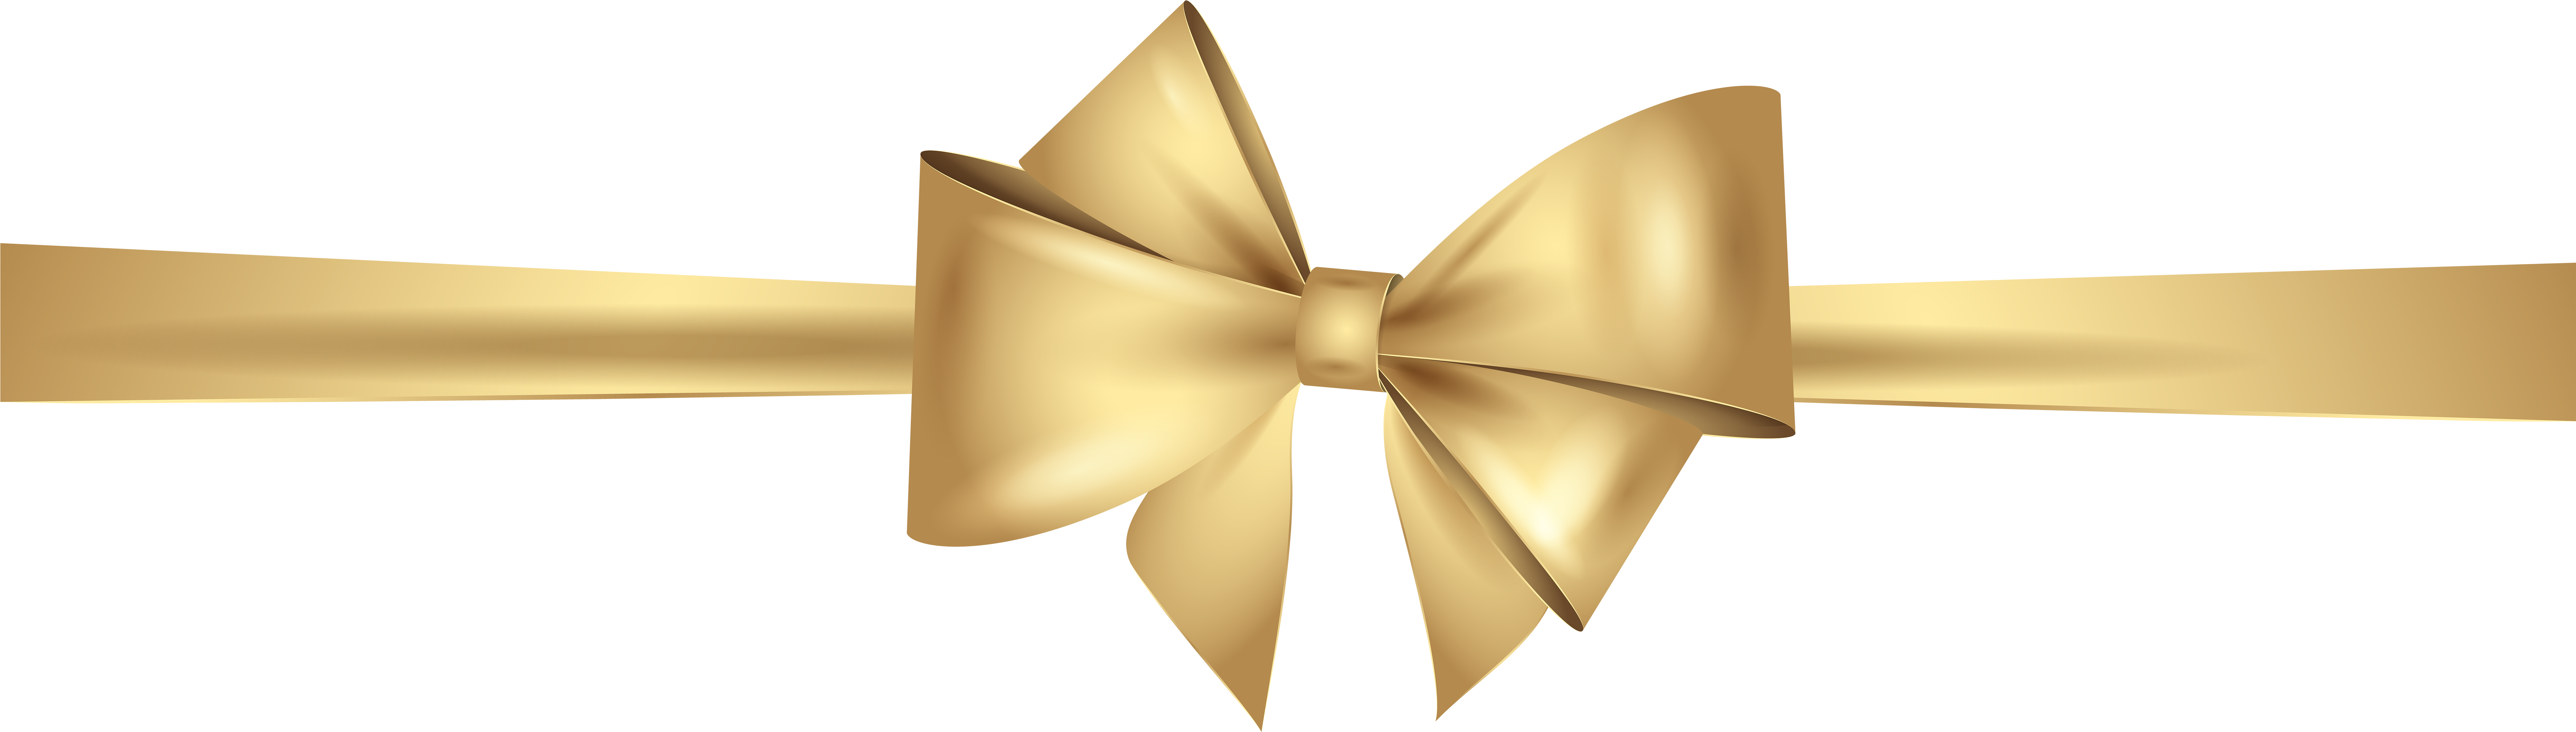 abstract, bow, golden png background download